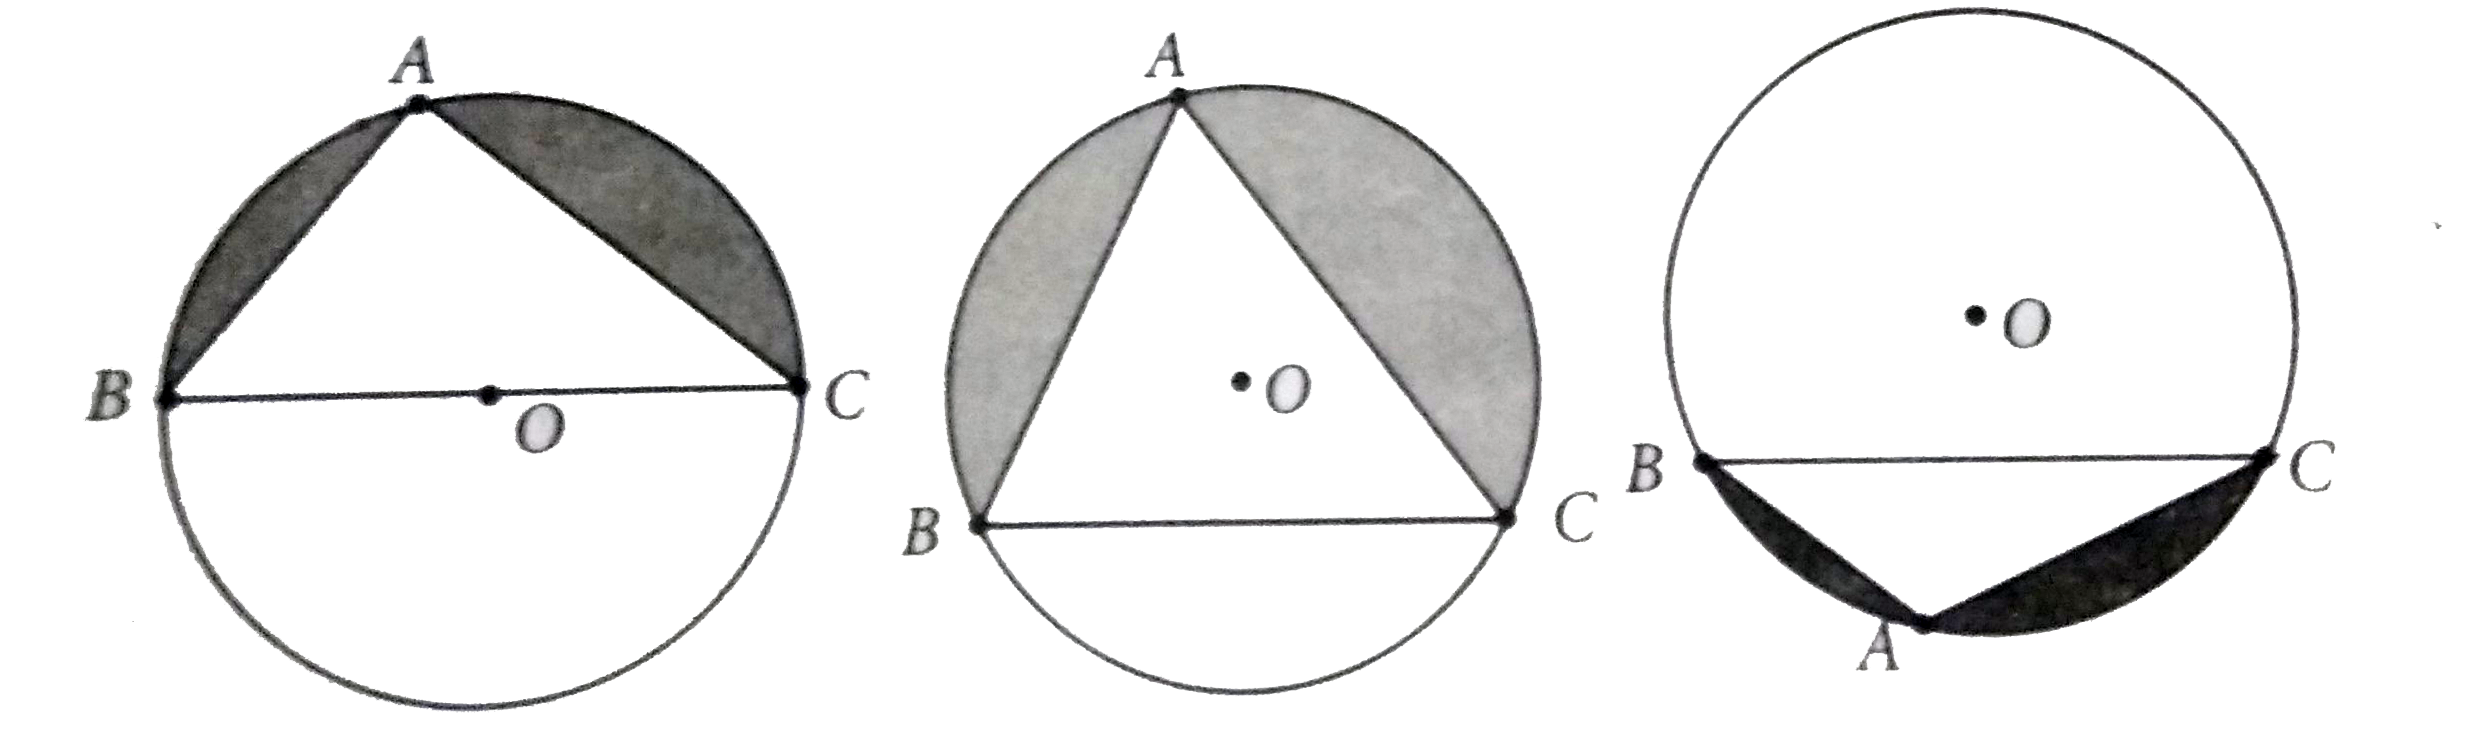 Procedure :   (i) Draw three circles of any radius with centre O on chart paper.   (ii) From these circles, cut a semi - circle, a minor segment and a major segment   (iii) Consider three points on these segment and name them as A,B, and C      (iv) Cut the triangles and paste it the graph sheet so that the point A coincides with the origin as shown in the figure.   Ovservation :   (i) Angle in a Semi - Circle is  . . . . . . . . . . angle.   (ii) Angle in a major segment is angle.   (iii) Angle in minor segment is  . . . . . . . angle.